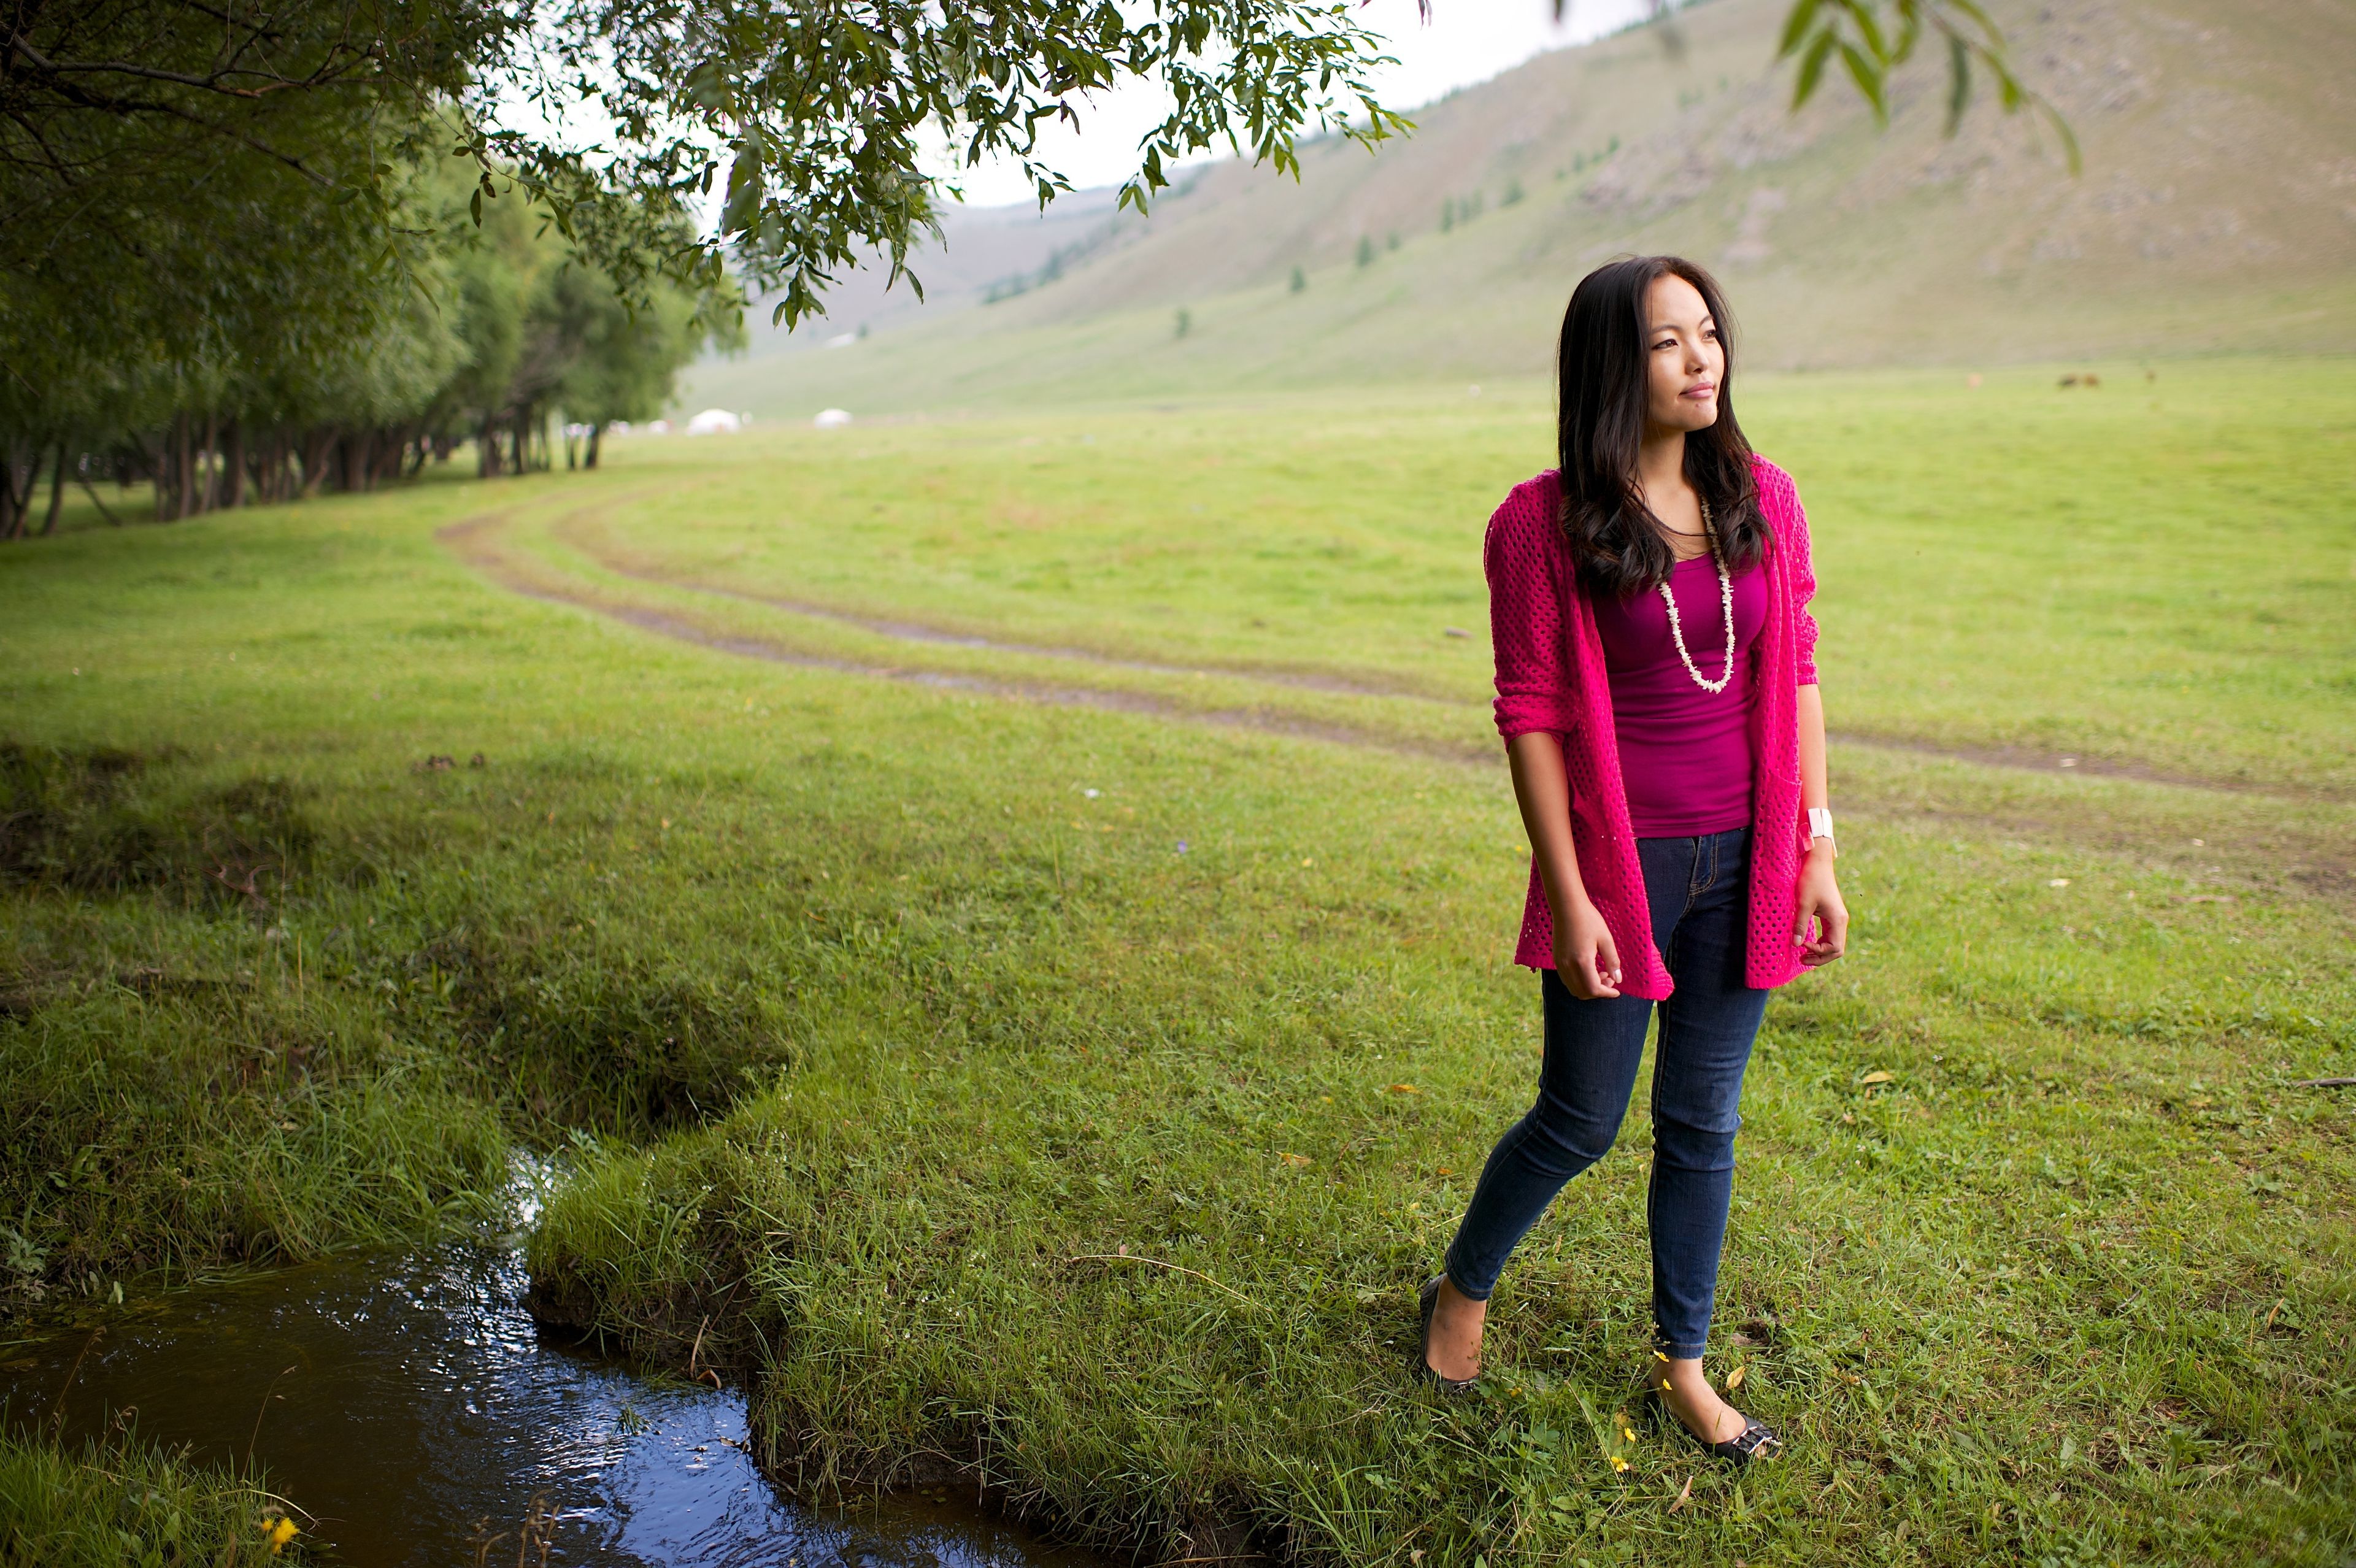 A Mongolian woman stands in a field, pondering.